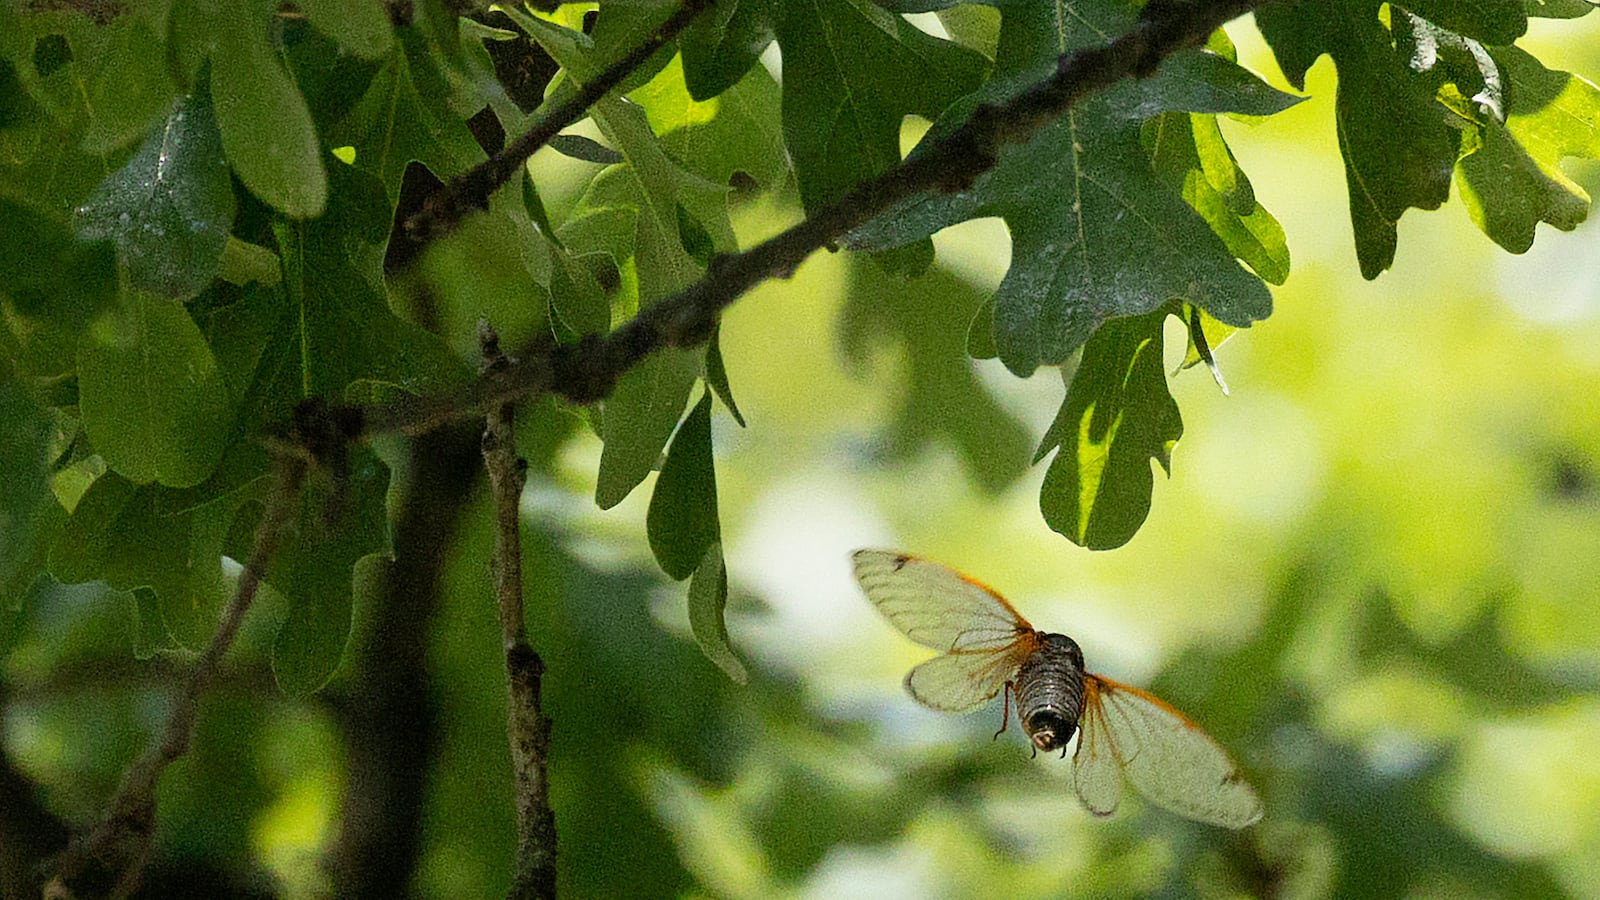 A cicada flies near the branches of a tree, as sunlight hits the leaves behind it.